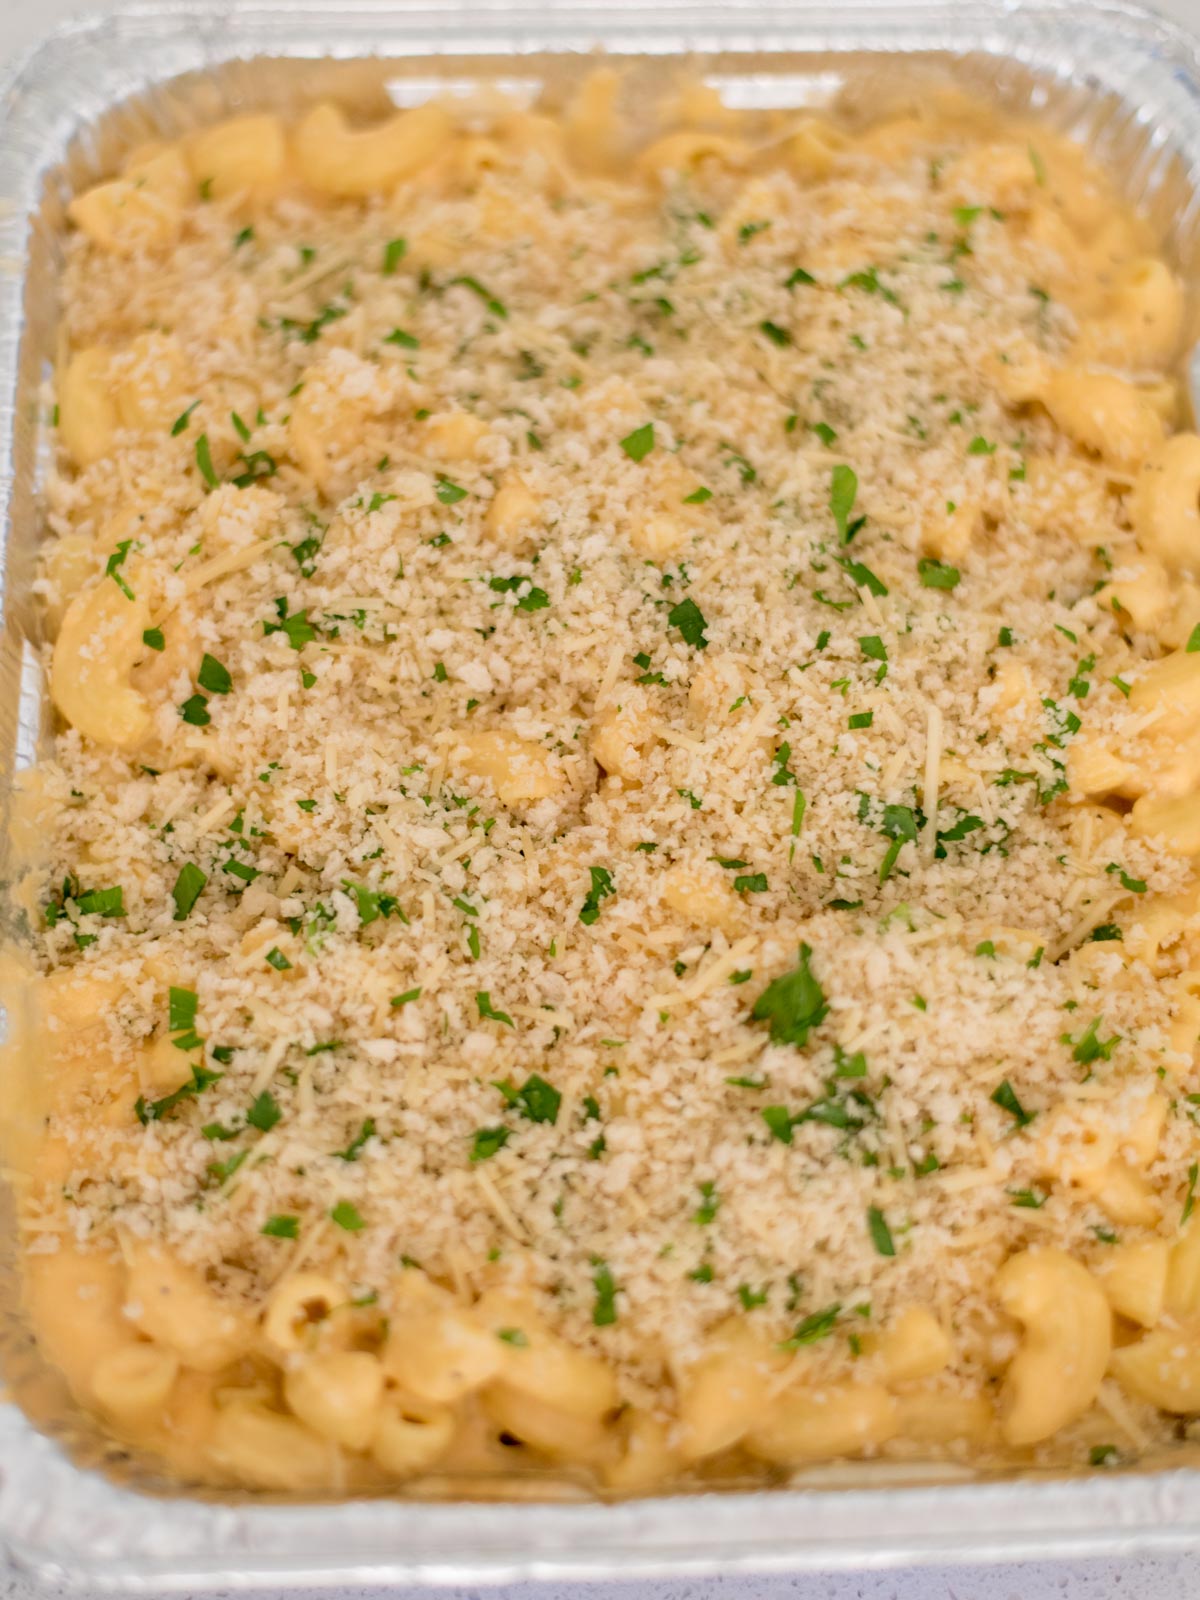 breadcrumb mixture added to the top of the macaroni and cheese sauce